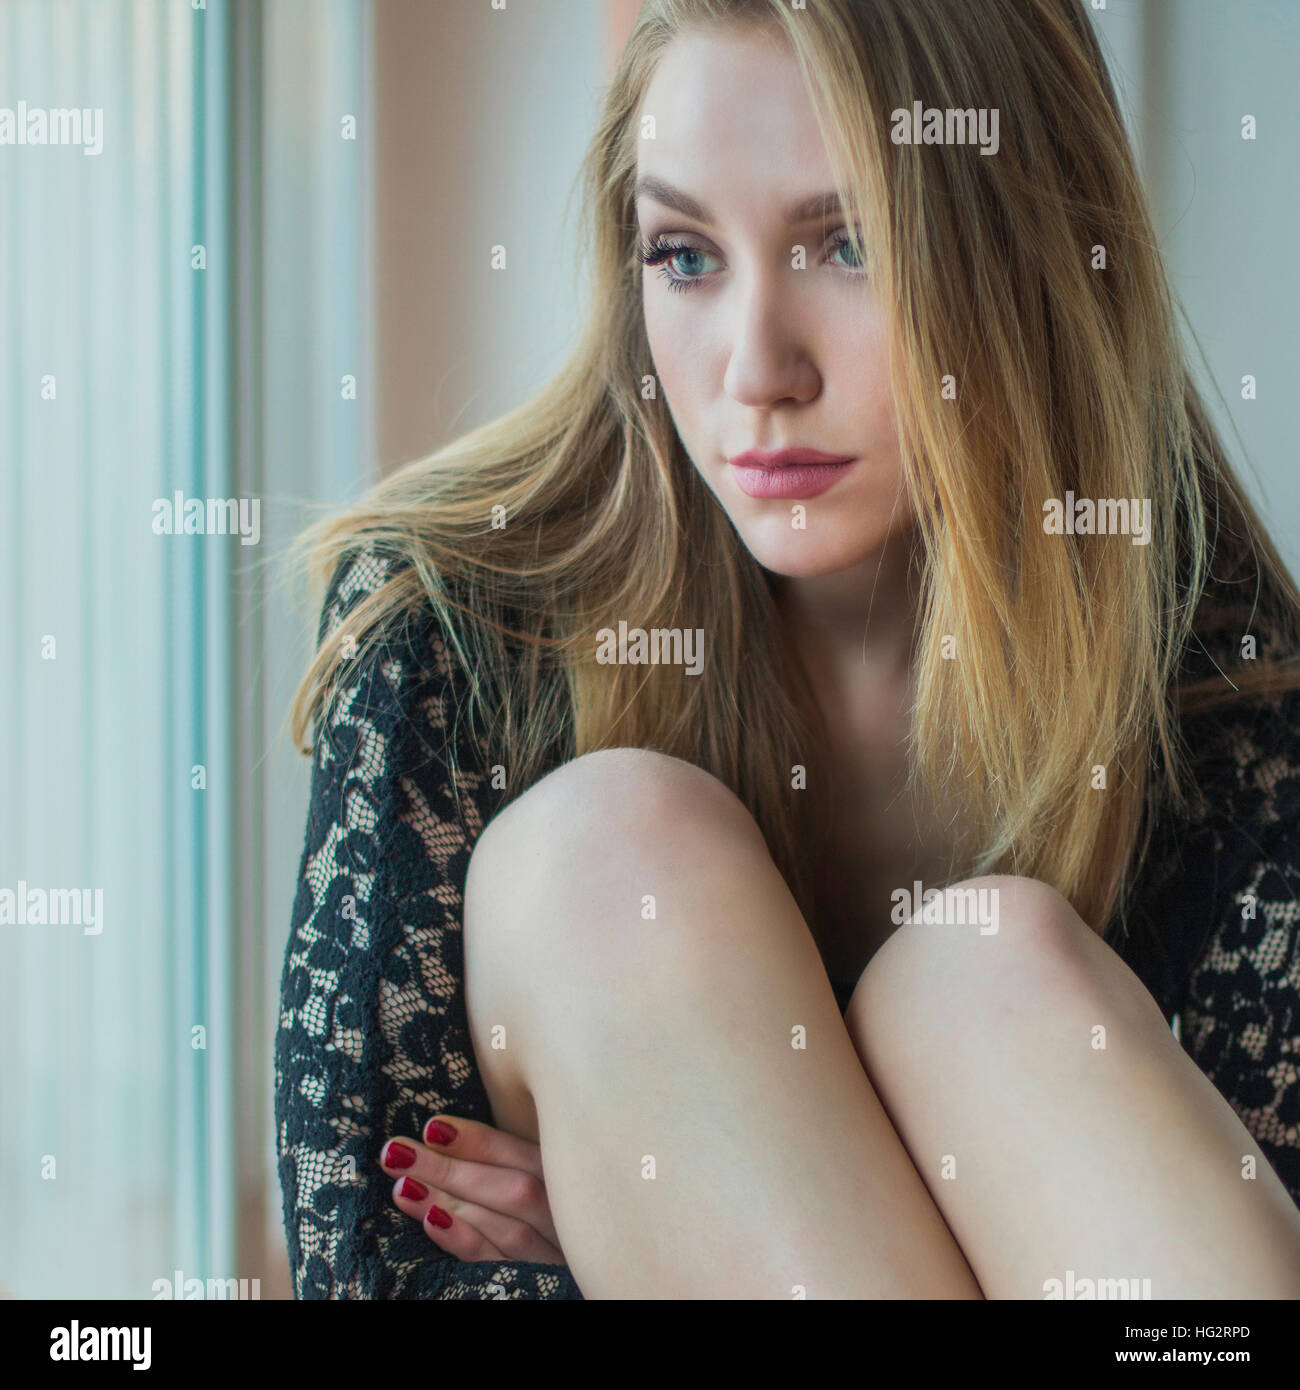 Young sexy blonde girl in panties and sweater standing next to window,  looking emotive and thoughtful Stock Photo - Alamy